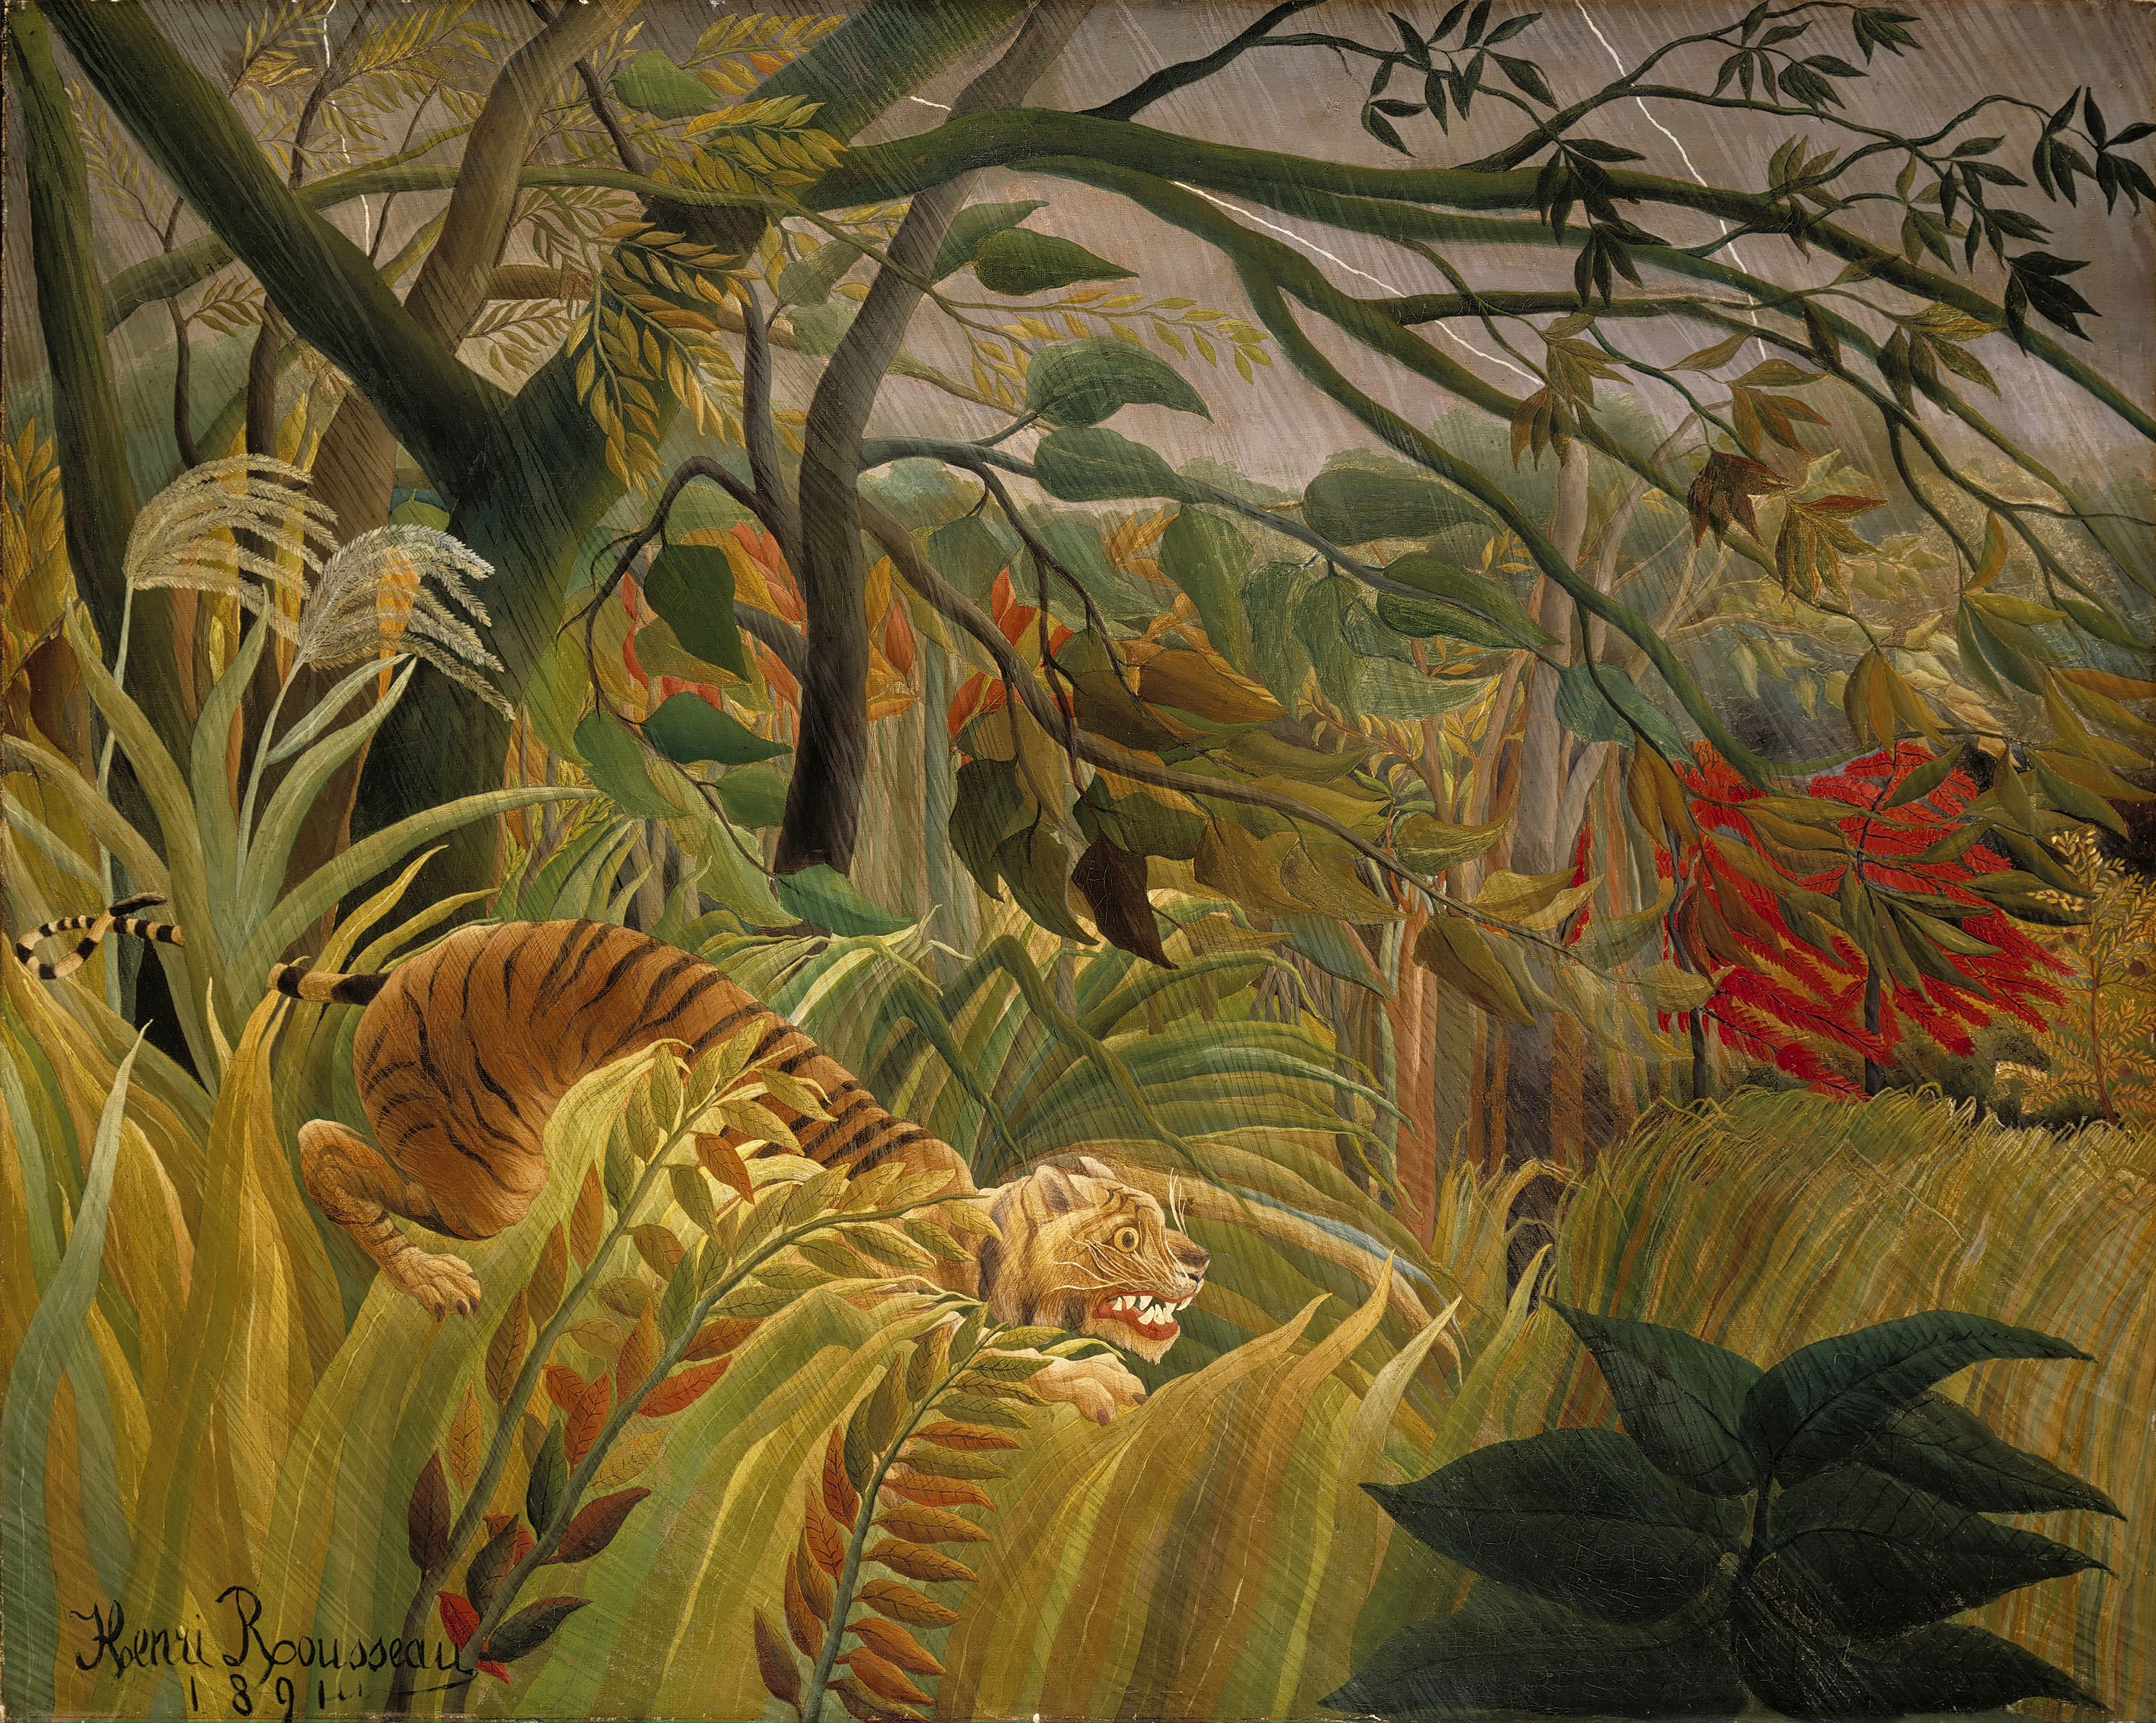 Tiger in a Tropical Storm (Surprised!) by Henri Rousseau - 1891 - 129.8 x 161.9 cm National Gallery